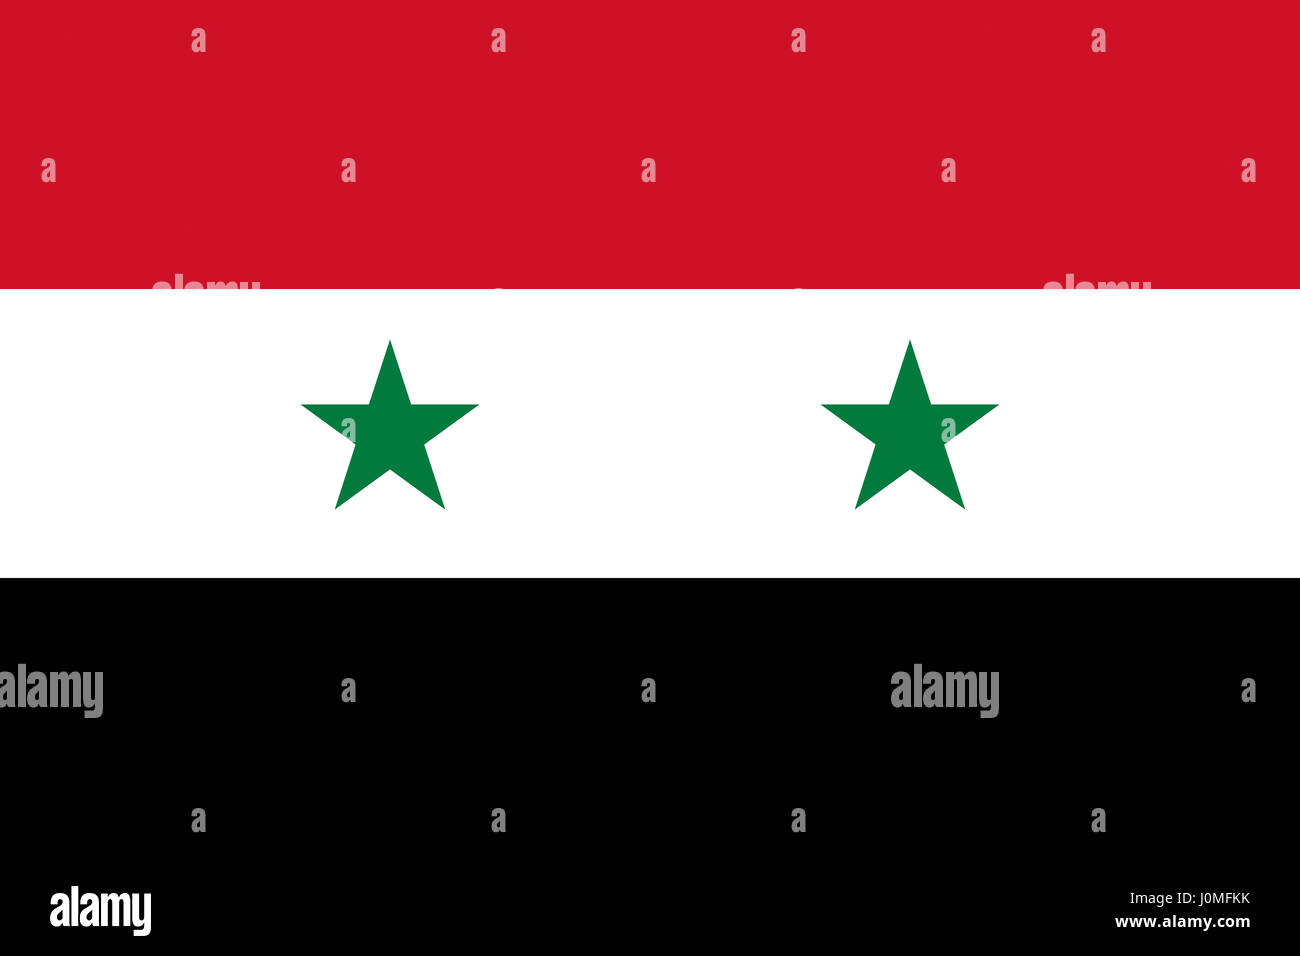 Illustration of the flag of Syria Stock Photo